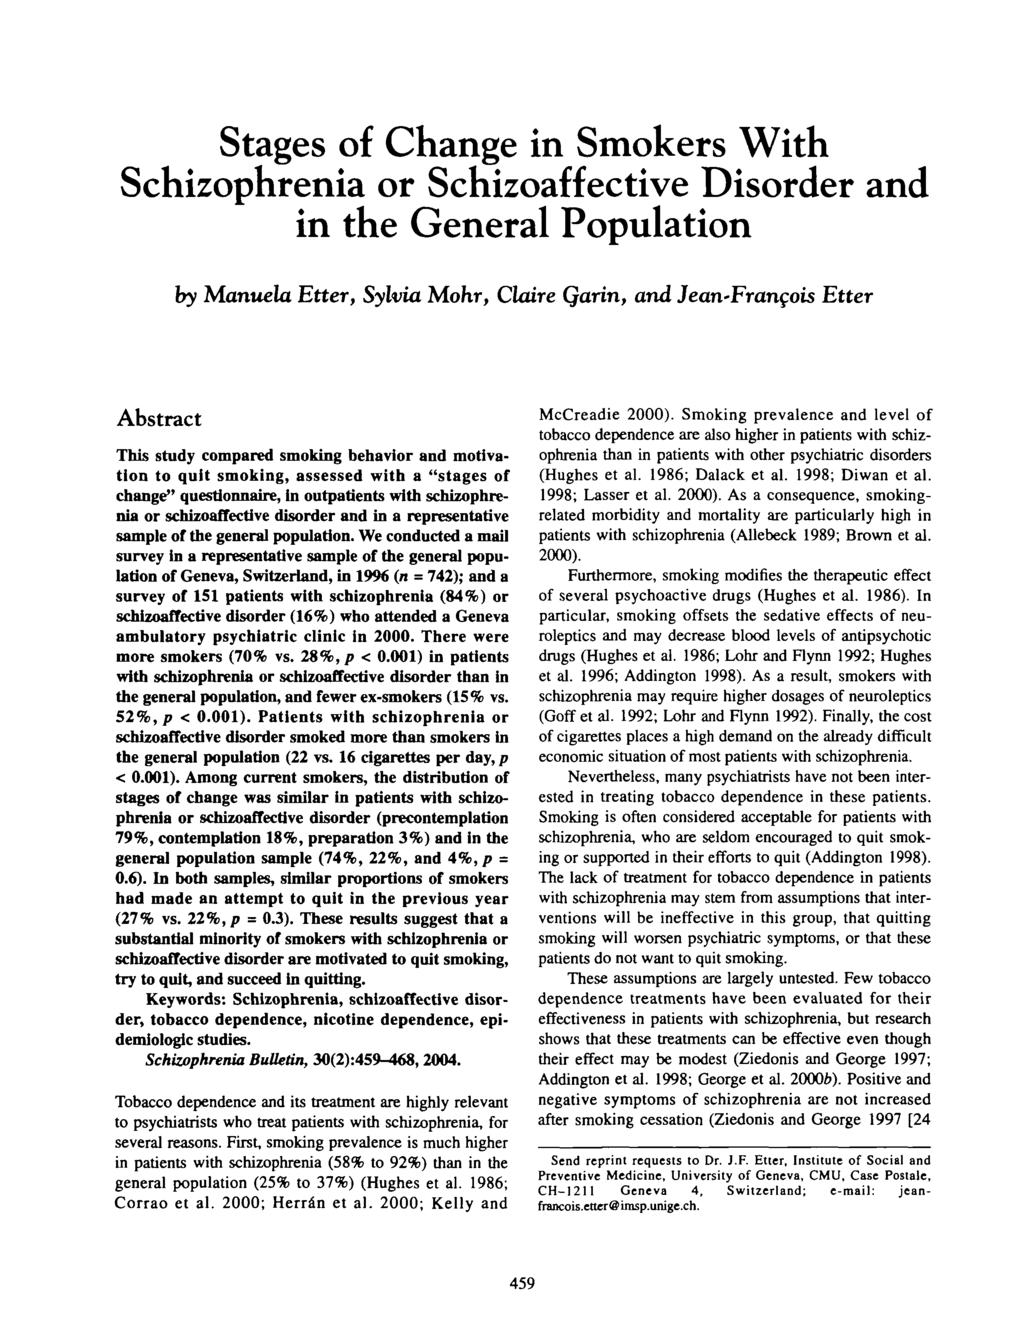 Stages of Change in Smokers With Schizophrenia or Schizoaffective Disorder and in the General Population by Manuela Etter, Sylvia Mohr, Claire Qarin, and Jeari'Frangois Etter Abstract This study